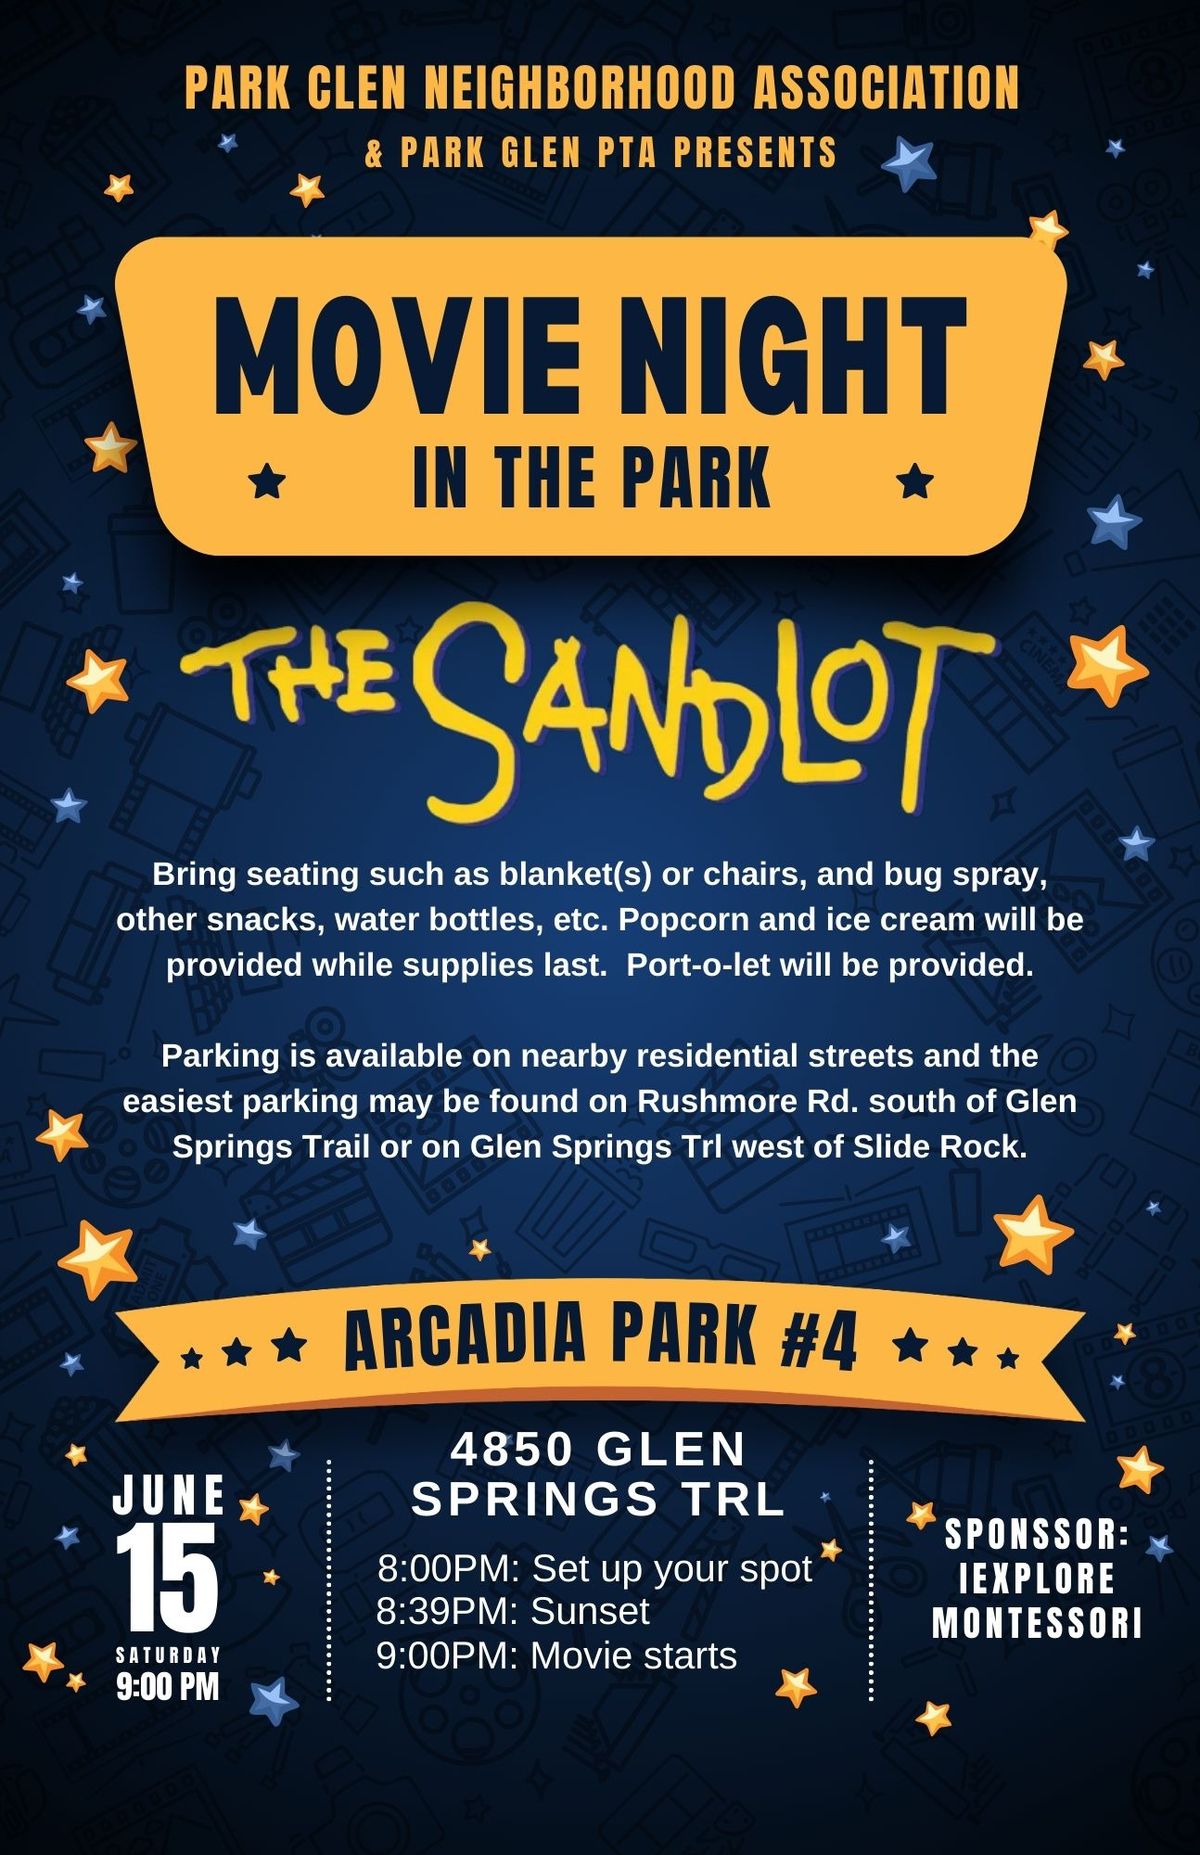 Movie Night in the Park